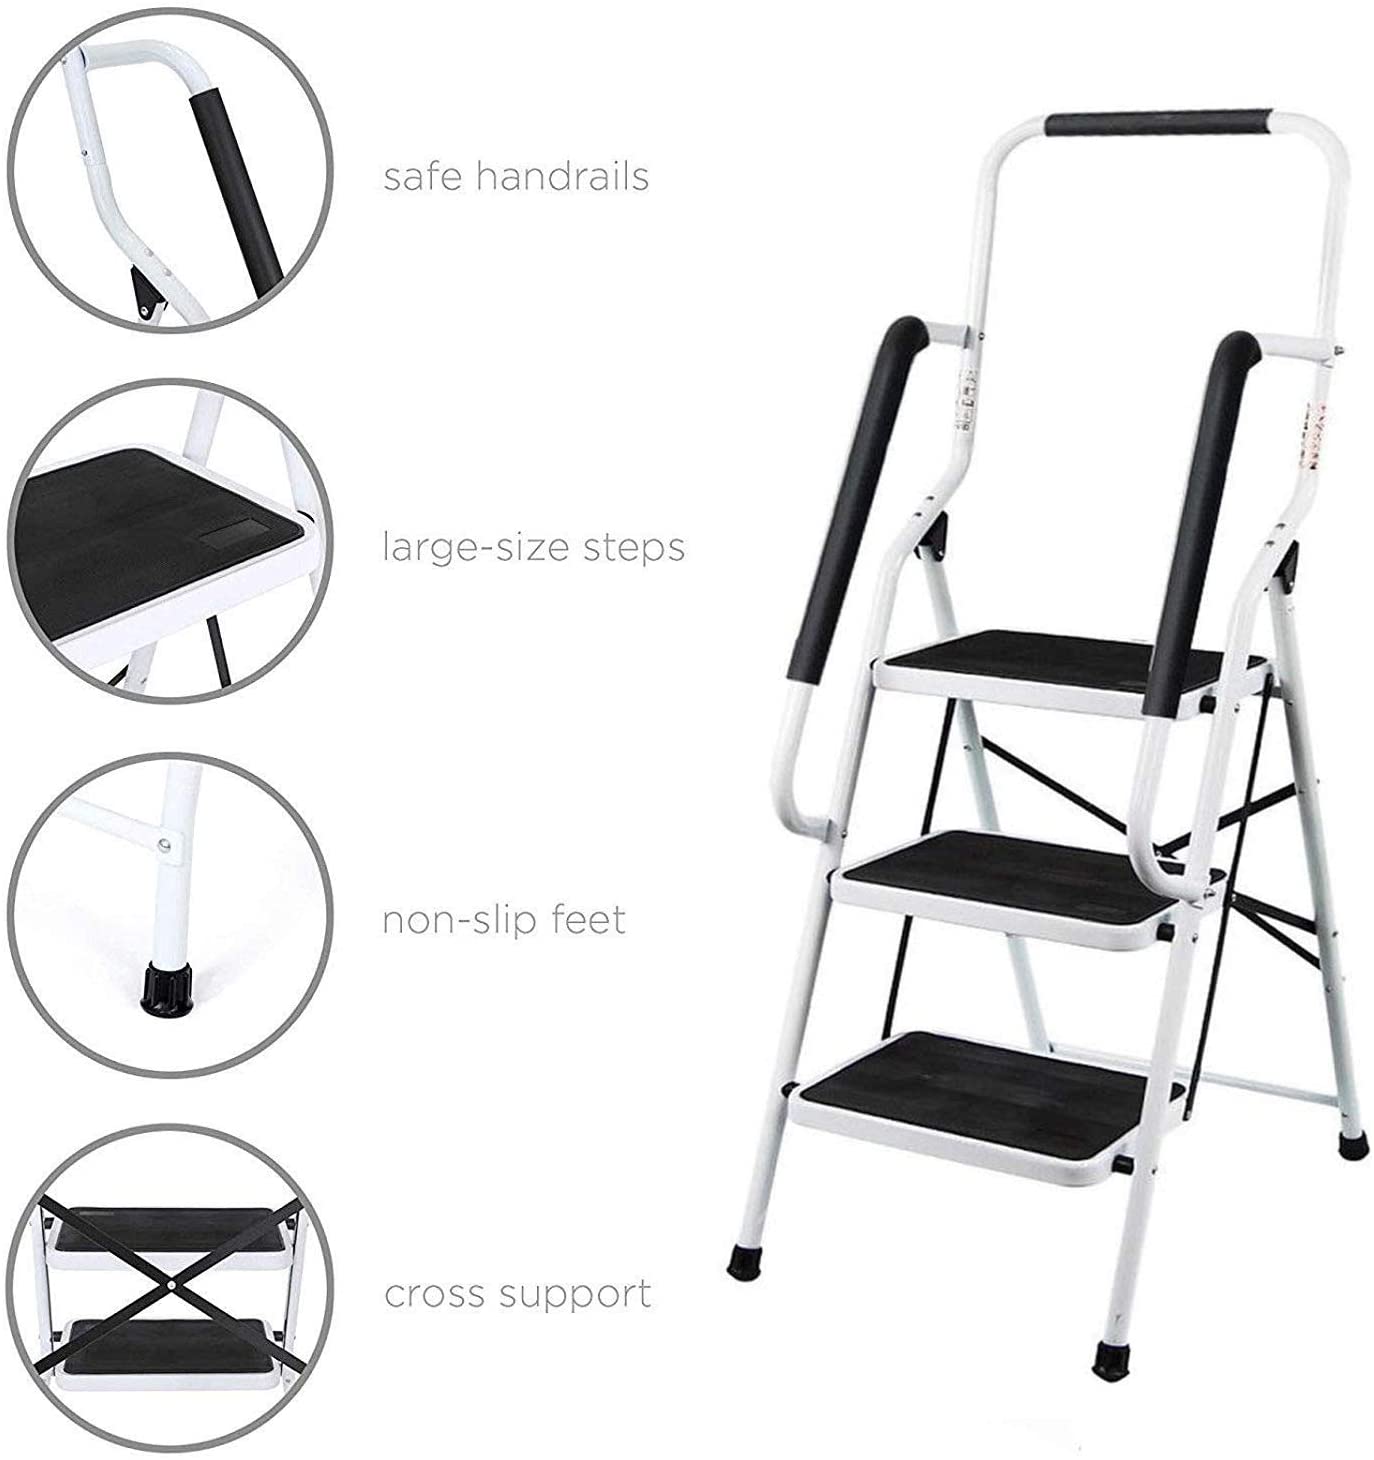 300lbs Fiudx Step Stool,Ladder Folding Step Stool,2 Step Ladder Tool Ladder Folding Portable Steel Frame Ladders Safety Padded Handrails with Large Area Pedals for Kitchen Home and Office 